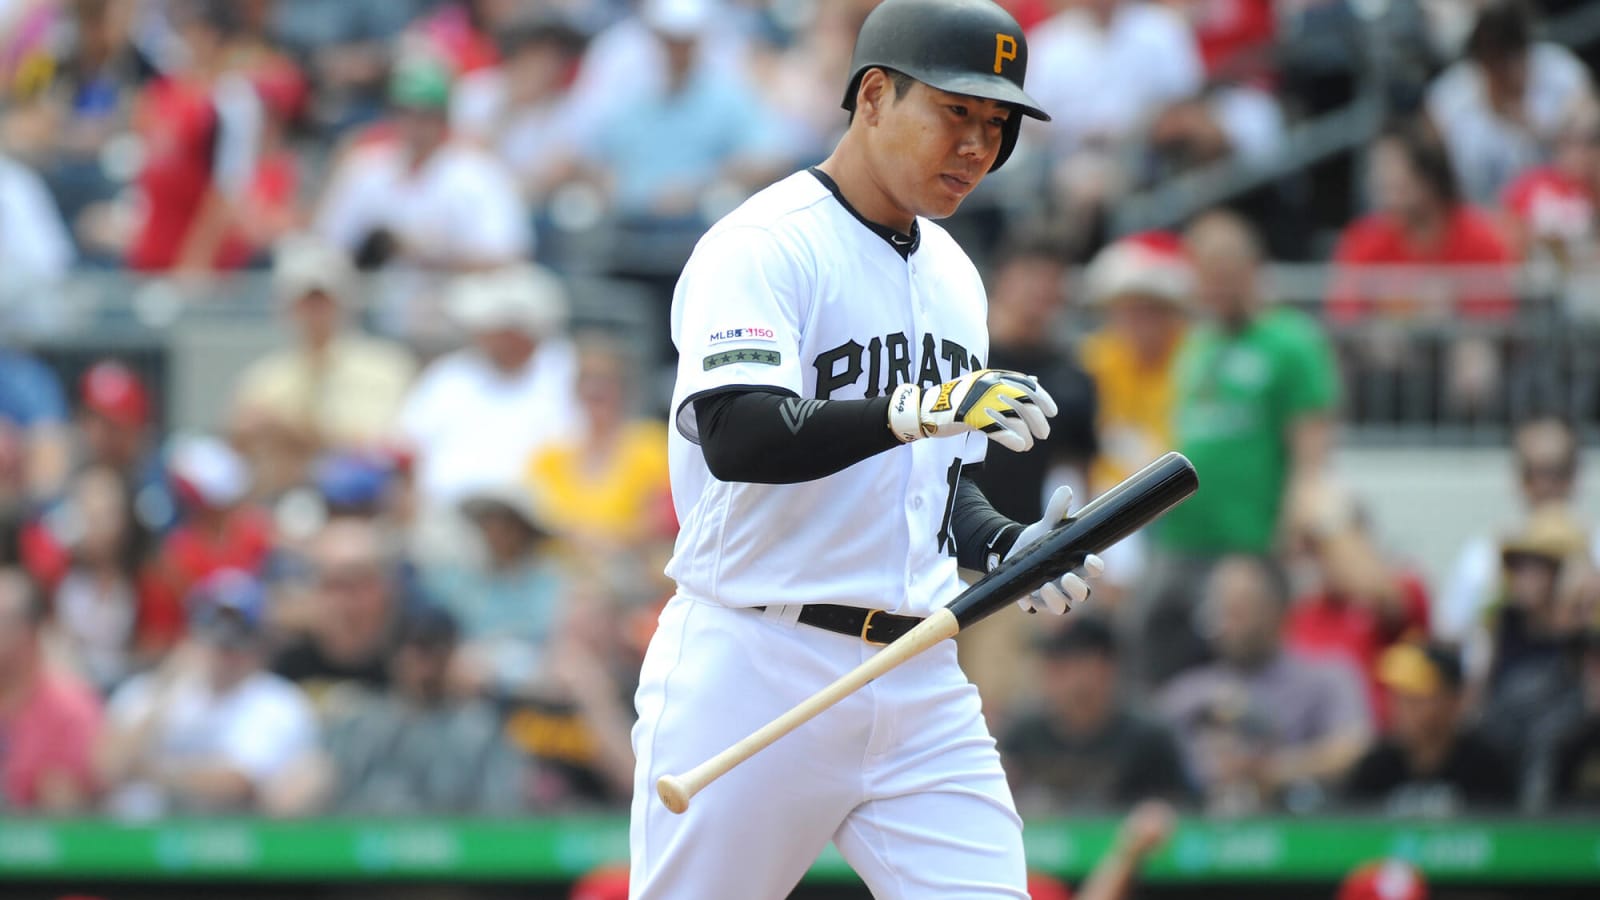 Watch: Ex-Bucco Jung Ho Kang Catches Foul Ball at Pirates/Padres Game